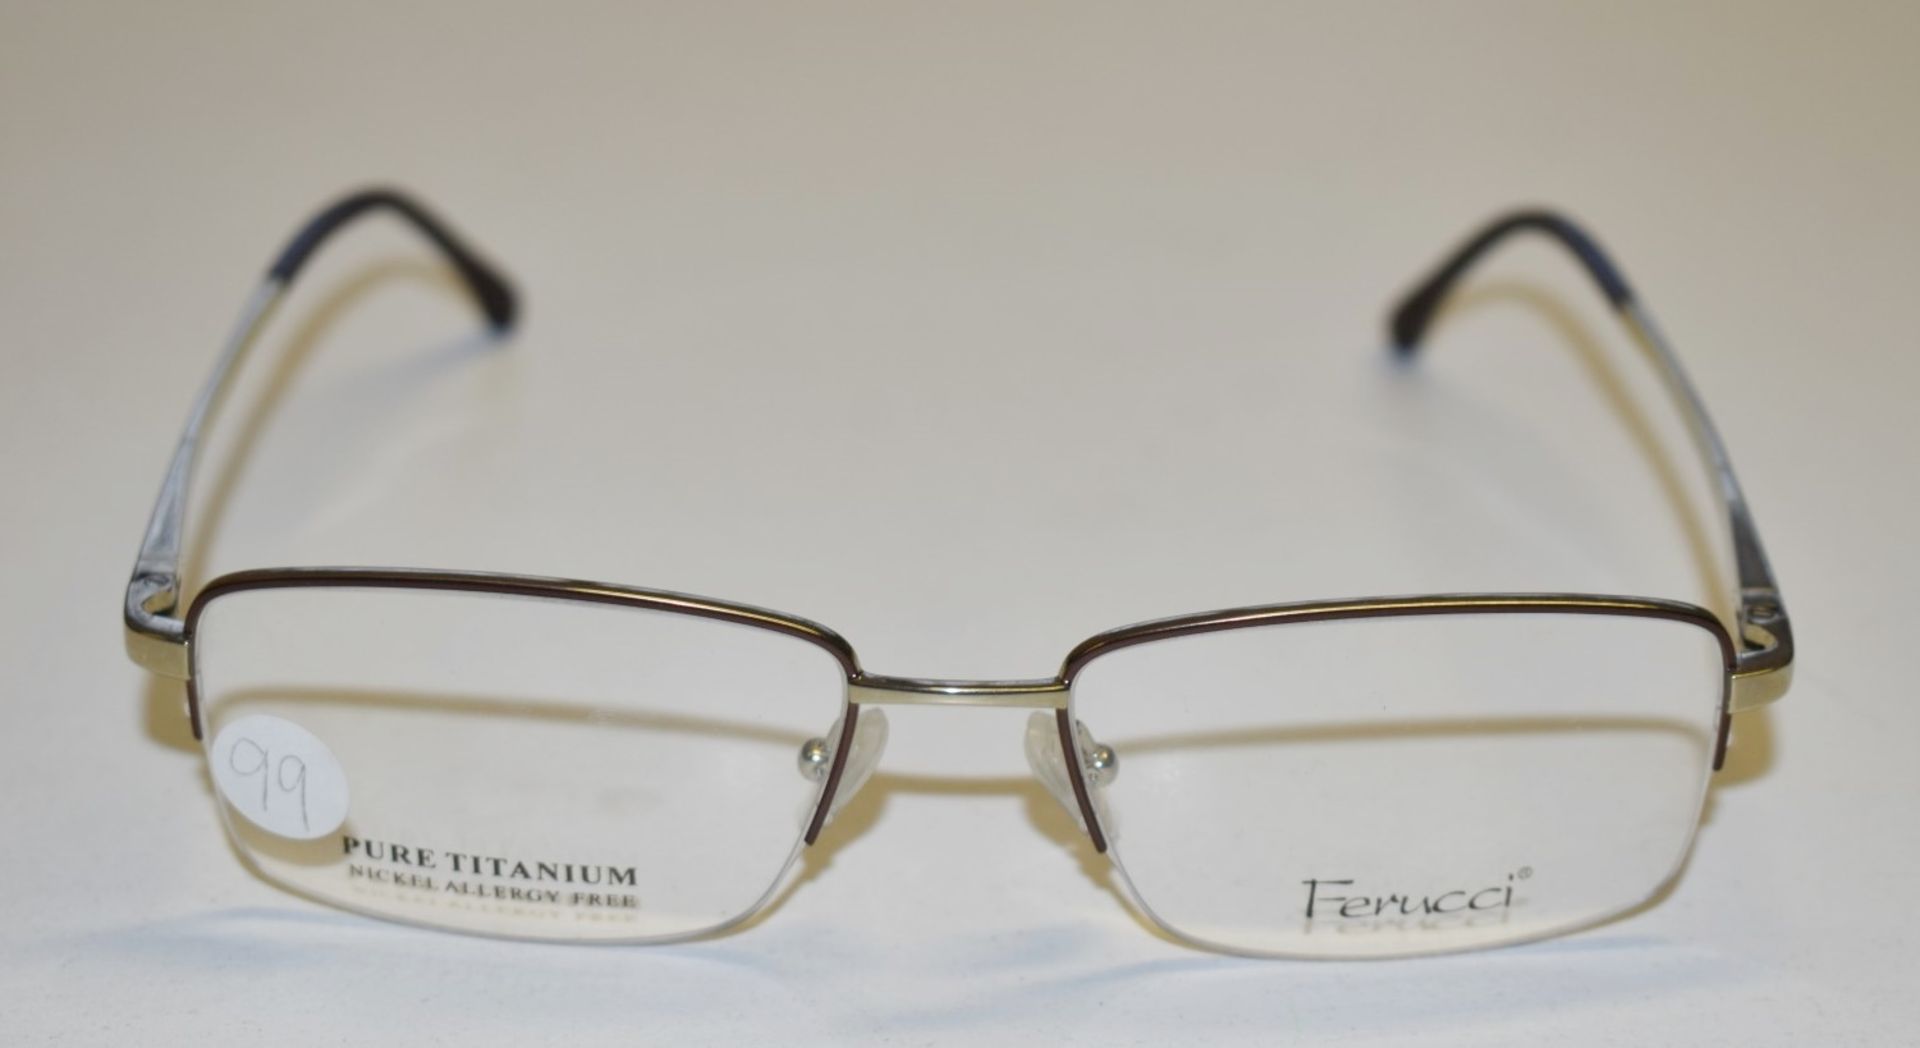 1 x Genuine FERUCCI Spectacle Eye Glasses Frame - Ex Display Stock  - Ref: GTI182 - CL645 - - Image 9 of 12